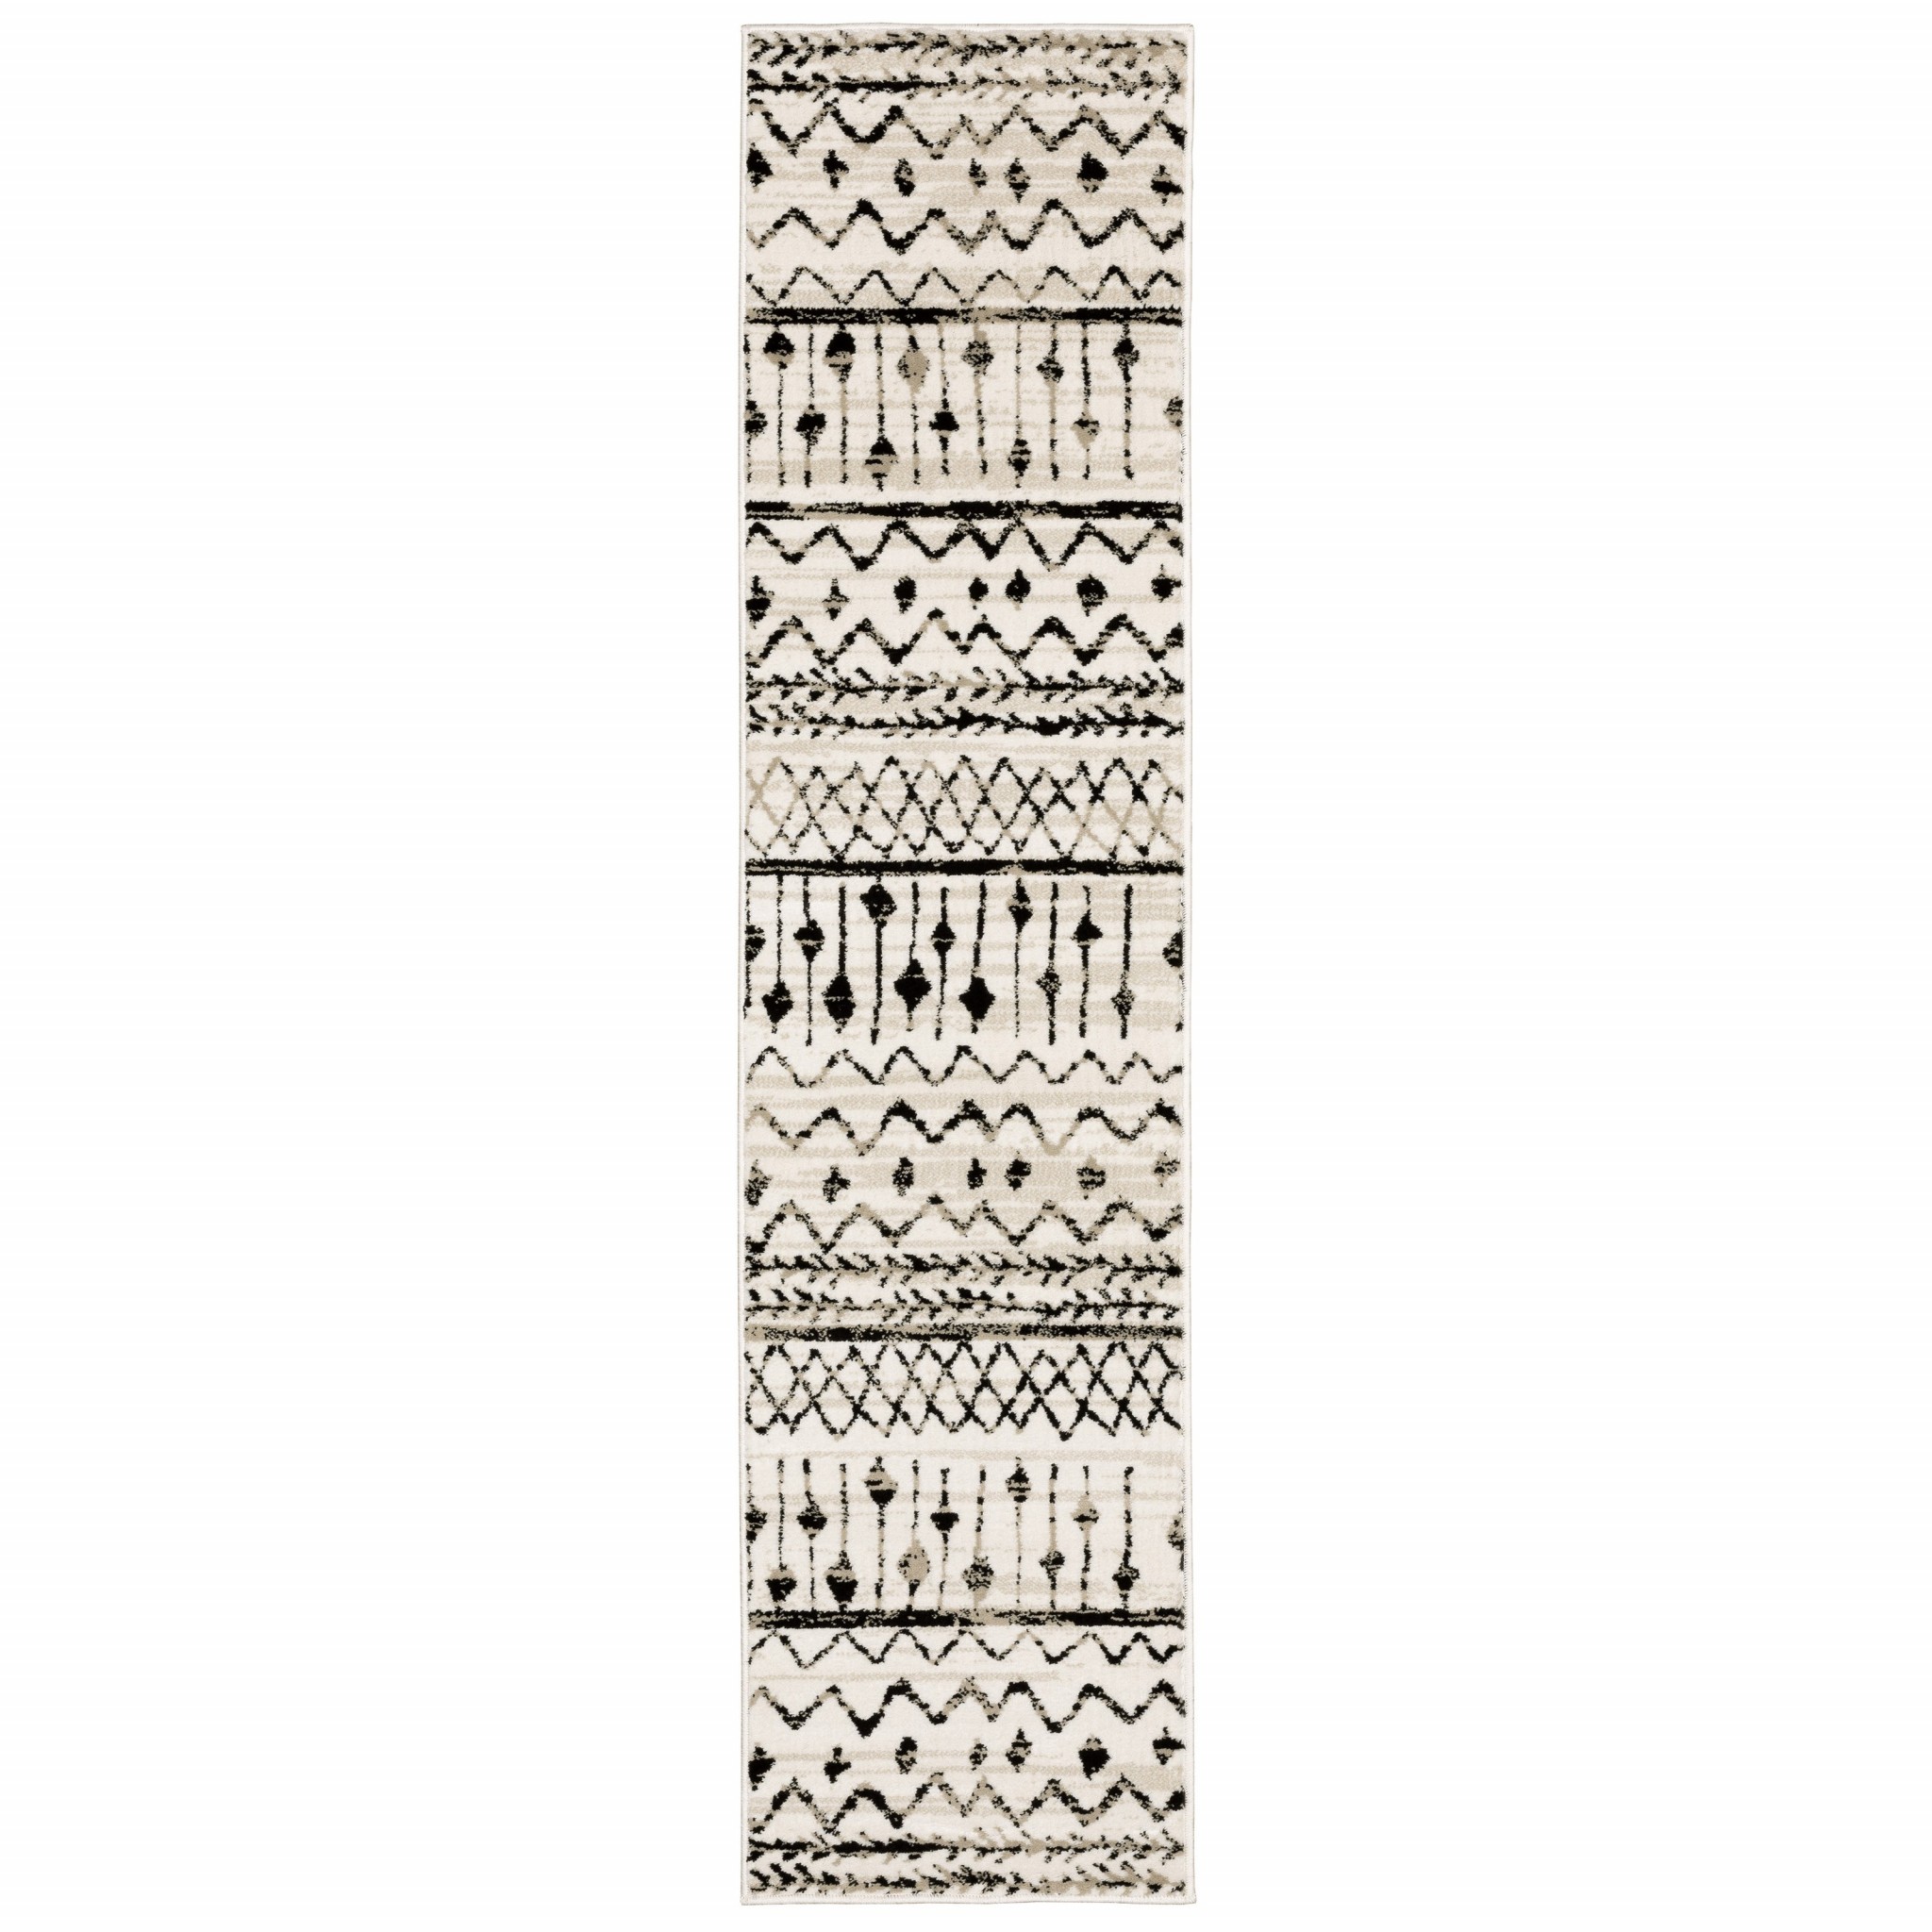 2’ X 8’ Ivory And Black Eclectic Patterns Indoor Runner Rug-388017-1